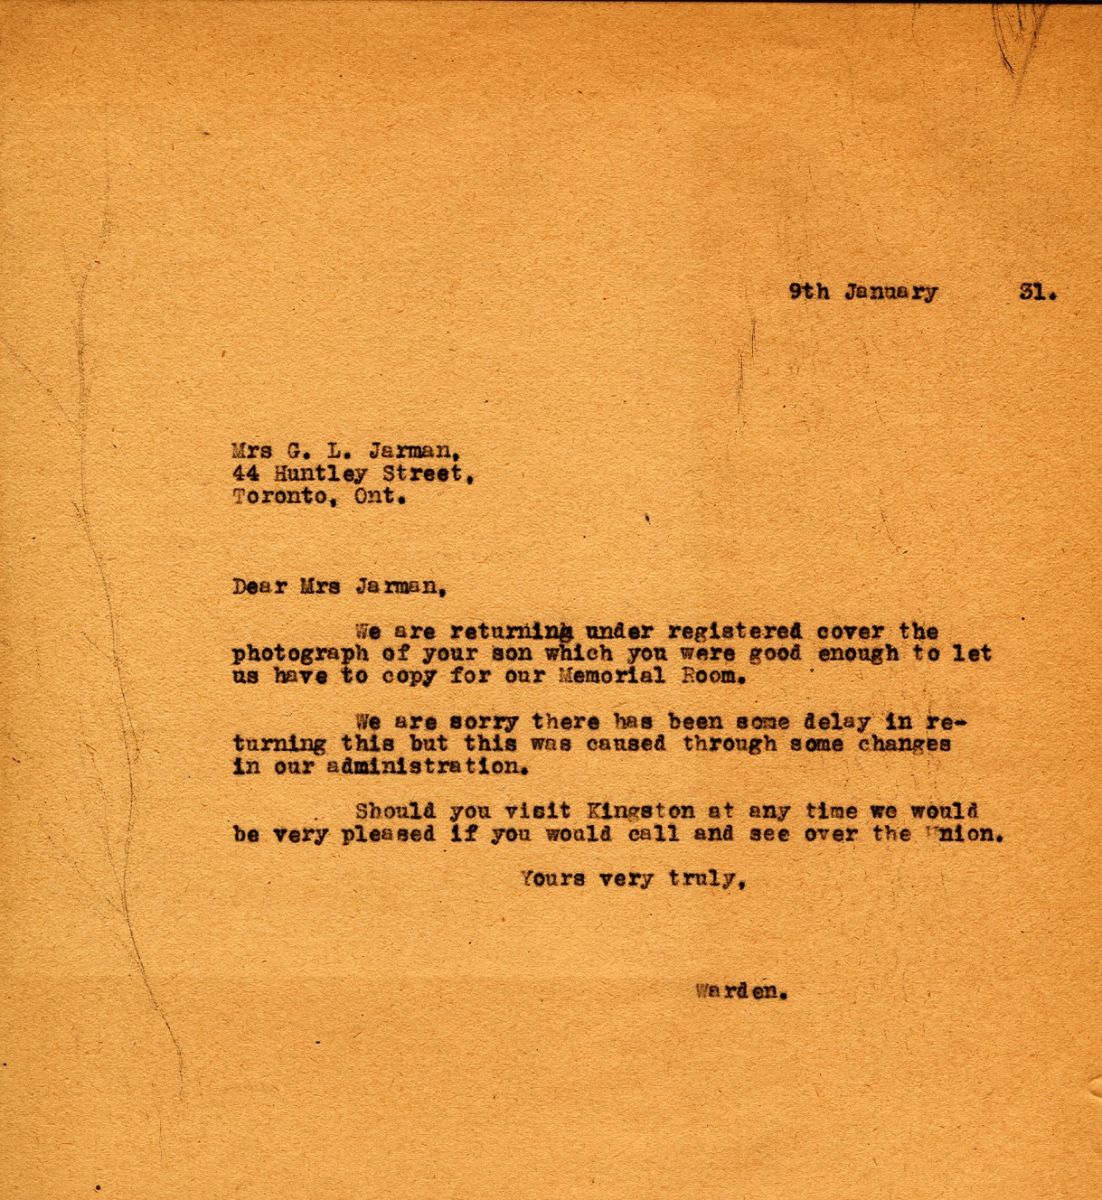 Letter from the Warden to Mrs. G.L. Jarman, 9th January 1931